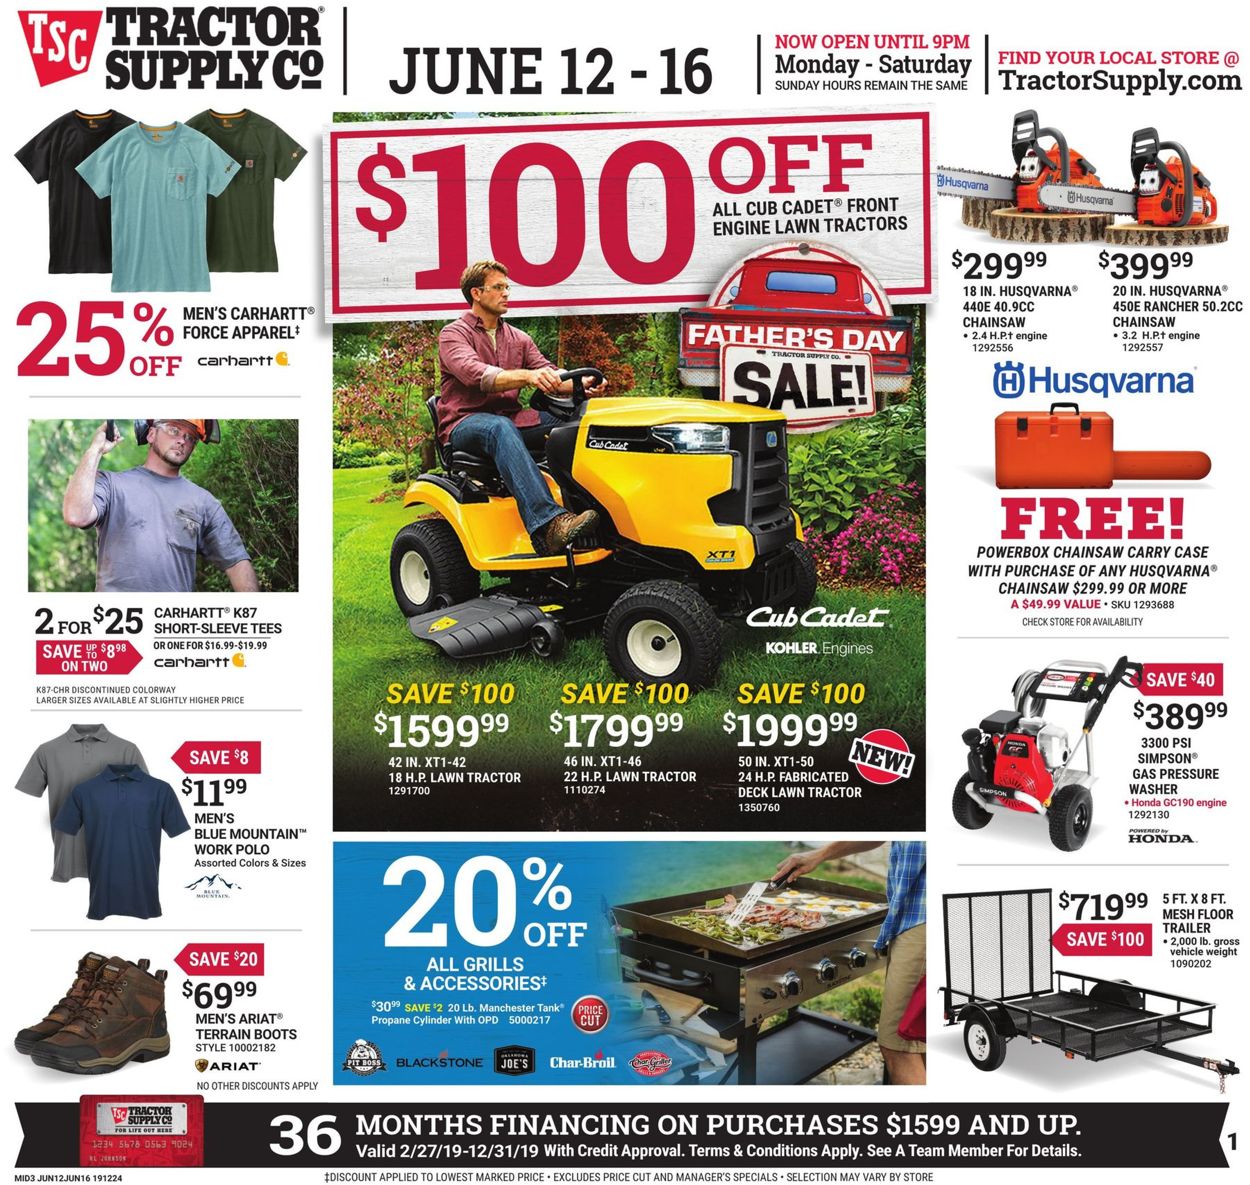 Tractor Supply Current weekly ad 06/12 06/16/2019 frequent ads com